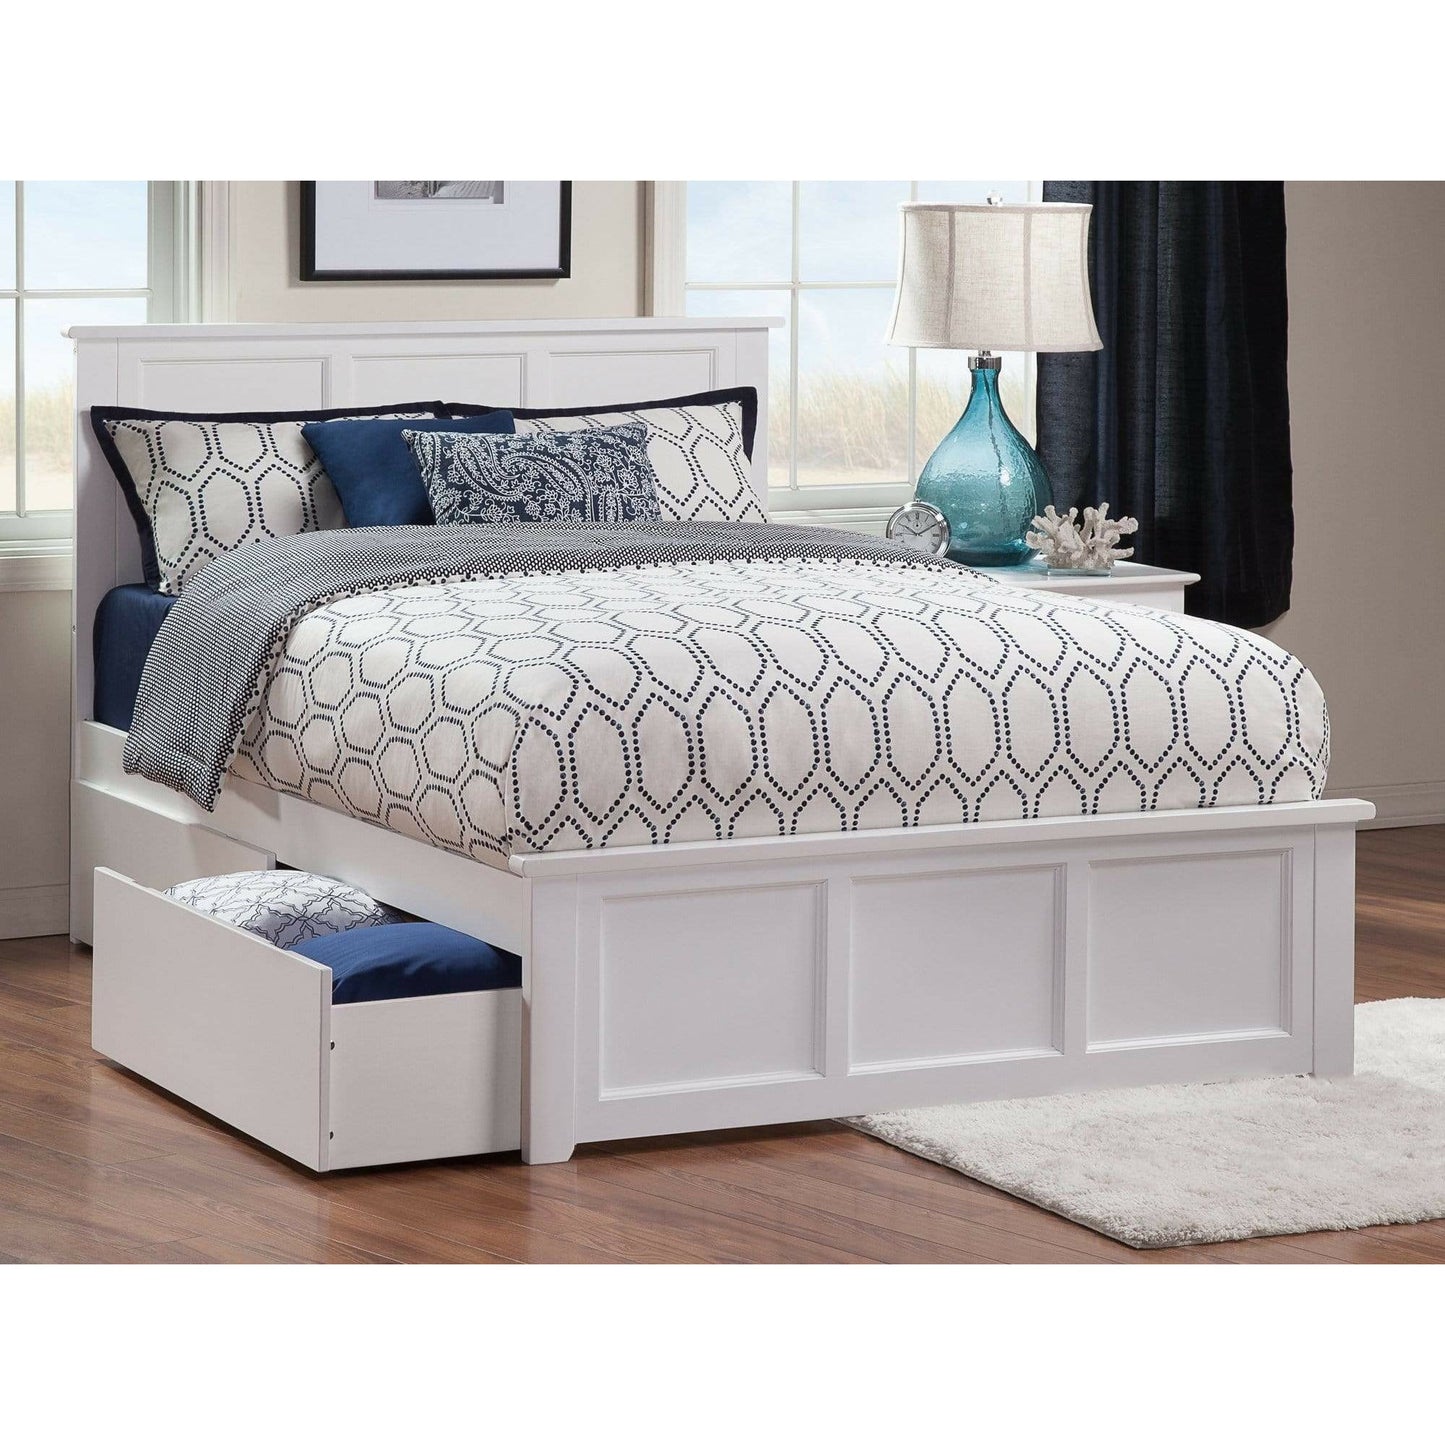 Atlantic Furniture Bed White Madison Full Platform Bed with Matching Foot Board with 2 Urban Bed Drawers in Espresso